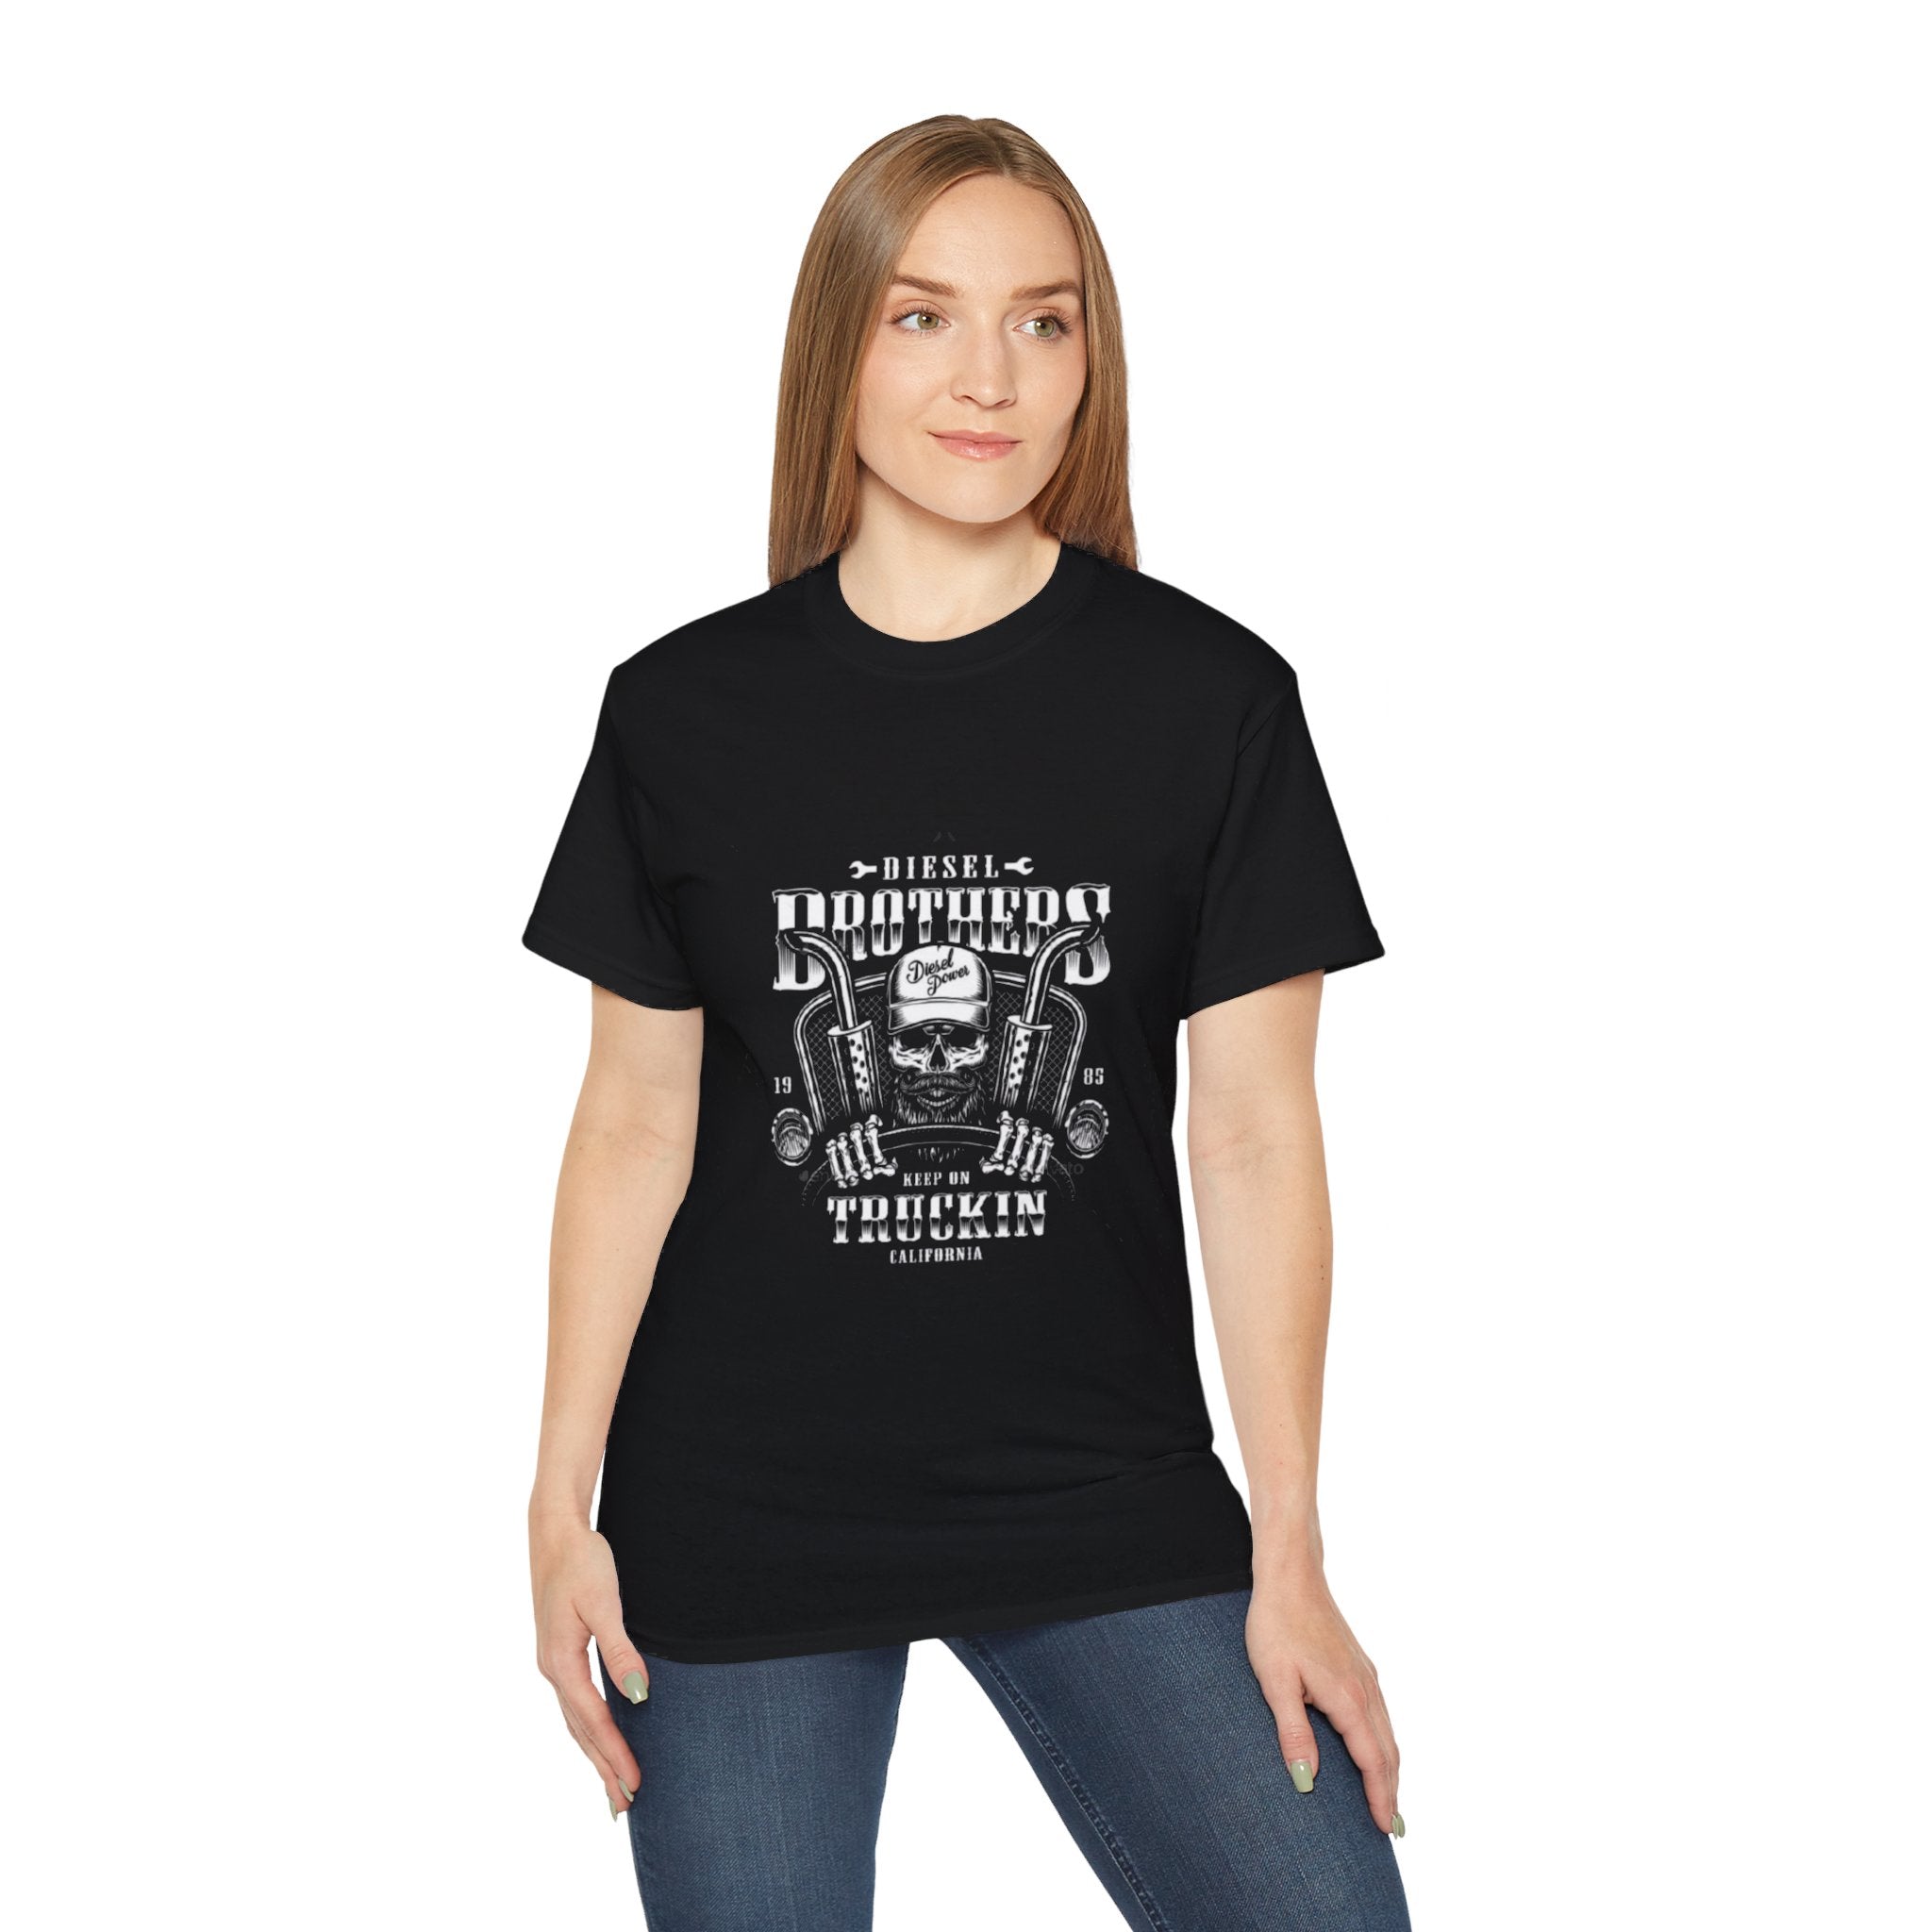 Ultra Cotton Tee Diesel brothers trucking